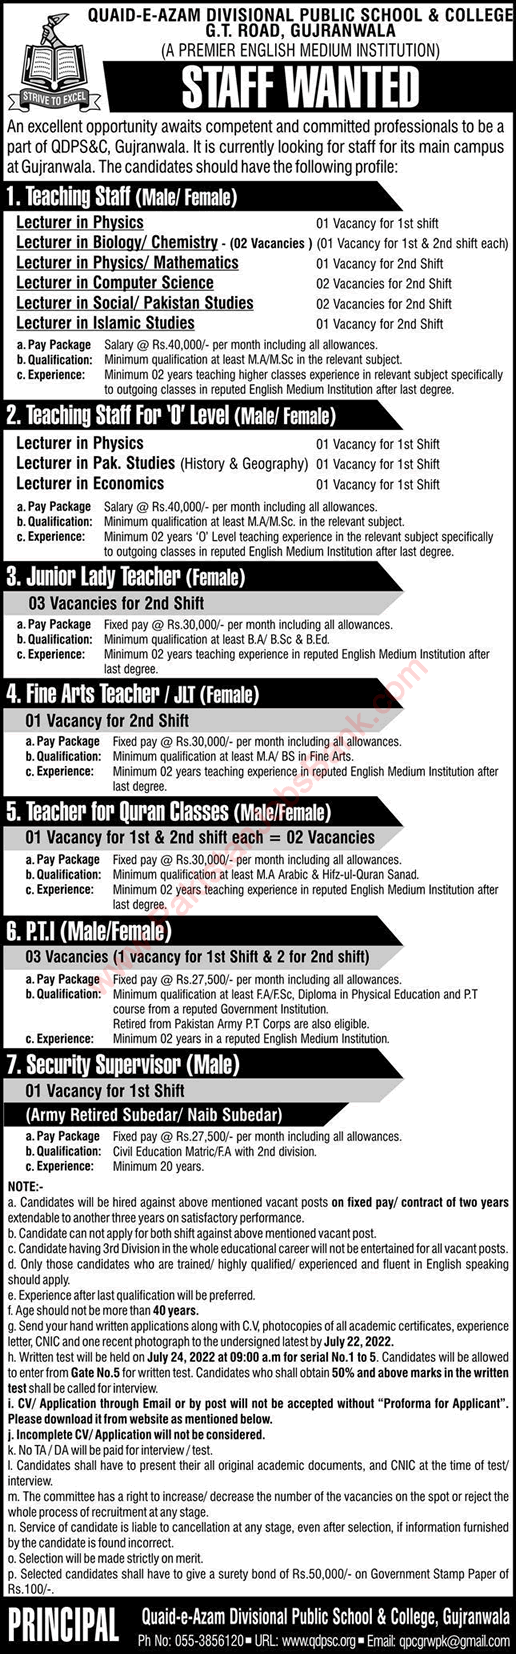 Quaid-e-Azam Divisional Public School and College Gujranwala Jobs July 2022 Teaching Faculty, Lecturers & Others Latest